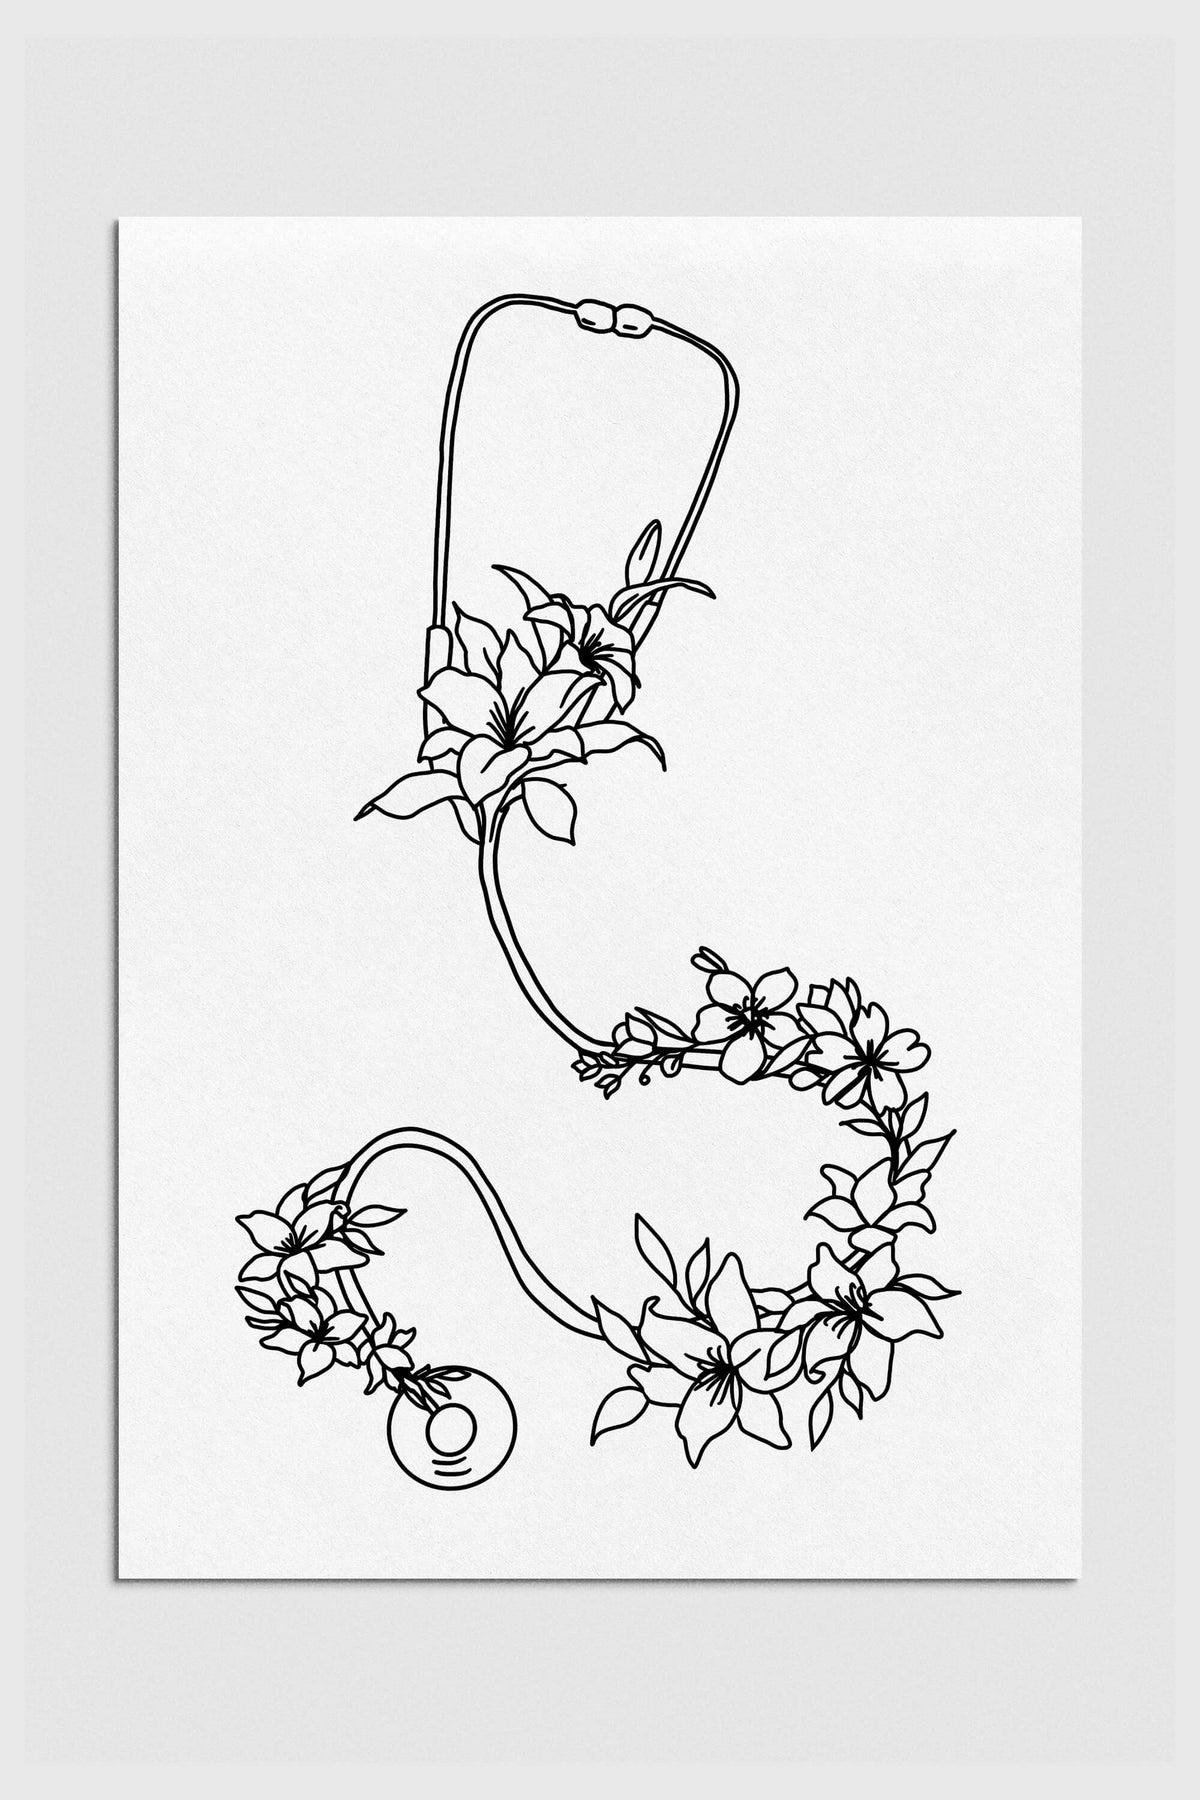 Elegant black and white illustration featuring a floral stethoscope, blending nature and medical themes for a unique cardiologist gift.